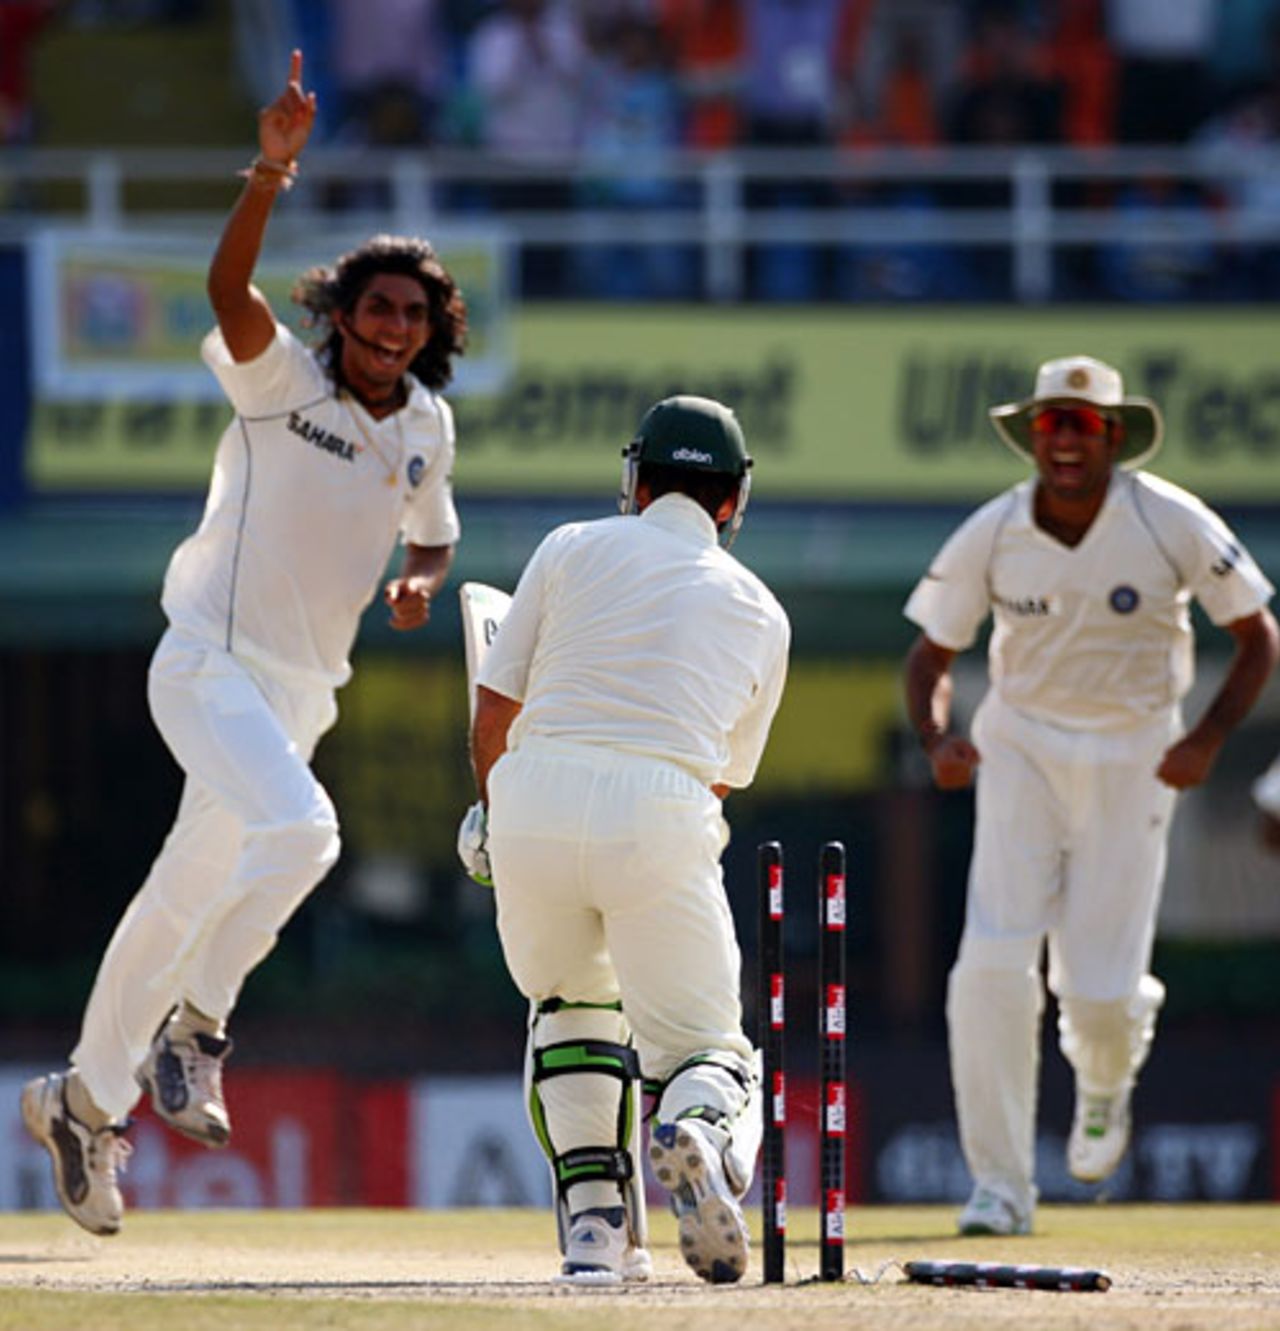 Ricky Ponting is comprehensively bowled by Ishant Sharma, India v Australia, 2nd Test, Mohali, 4th day, October 20, 2008